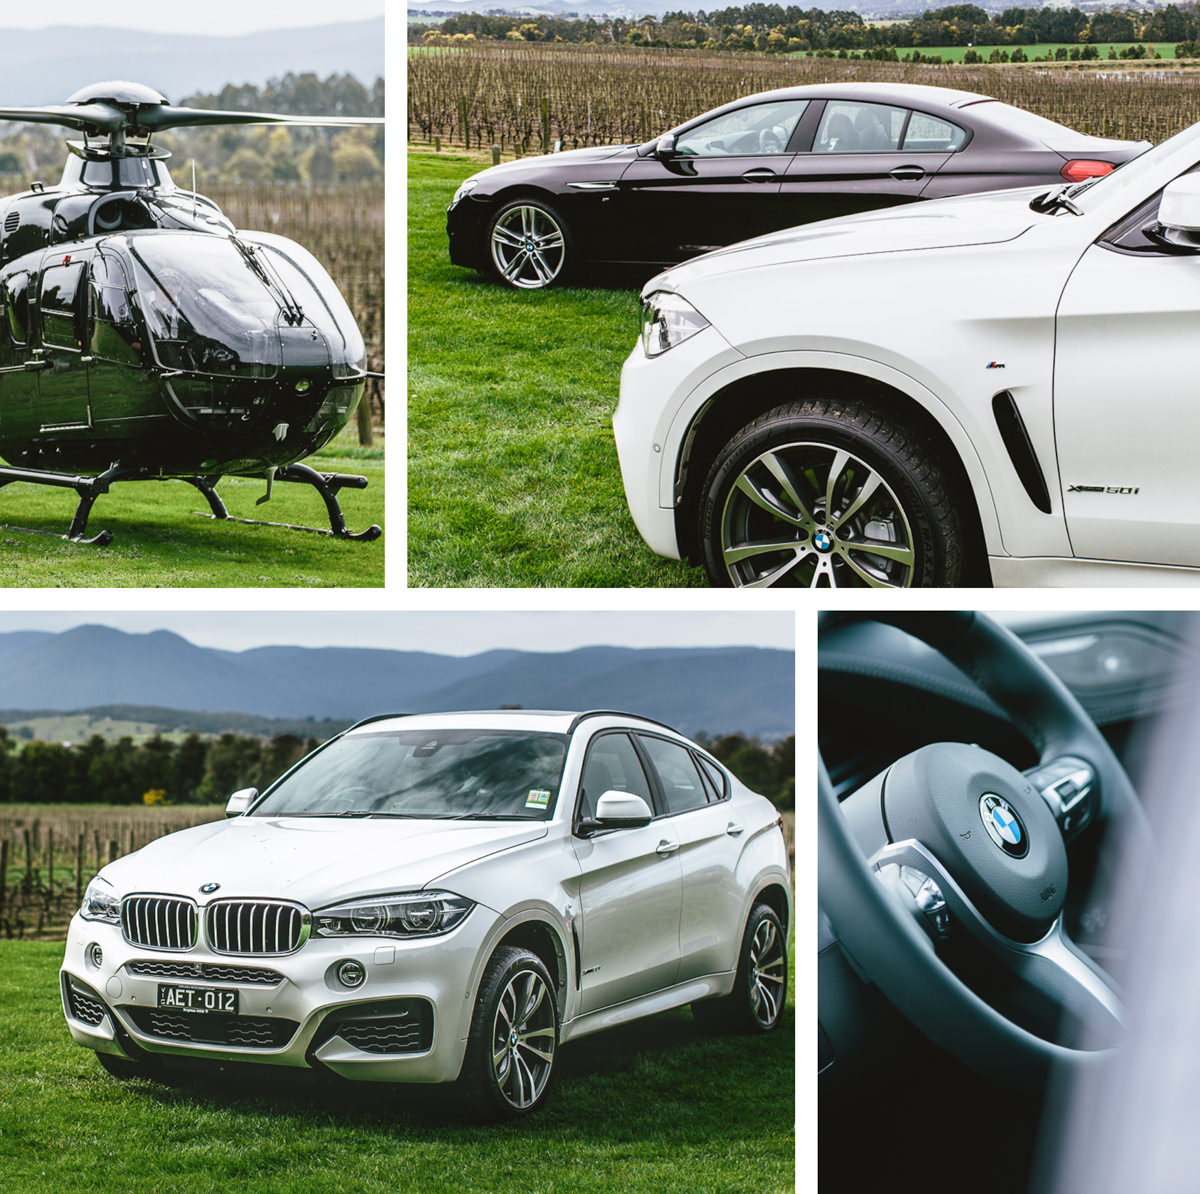 BMW event in the yarra valley - photographed by freshphotography